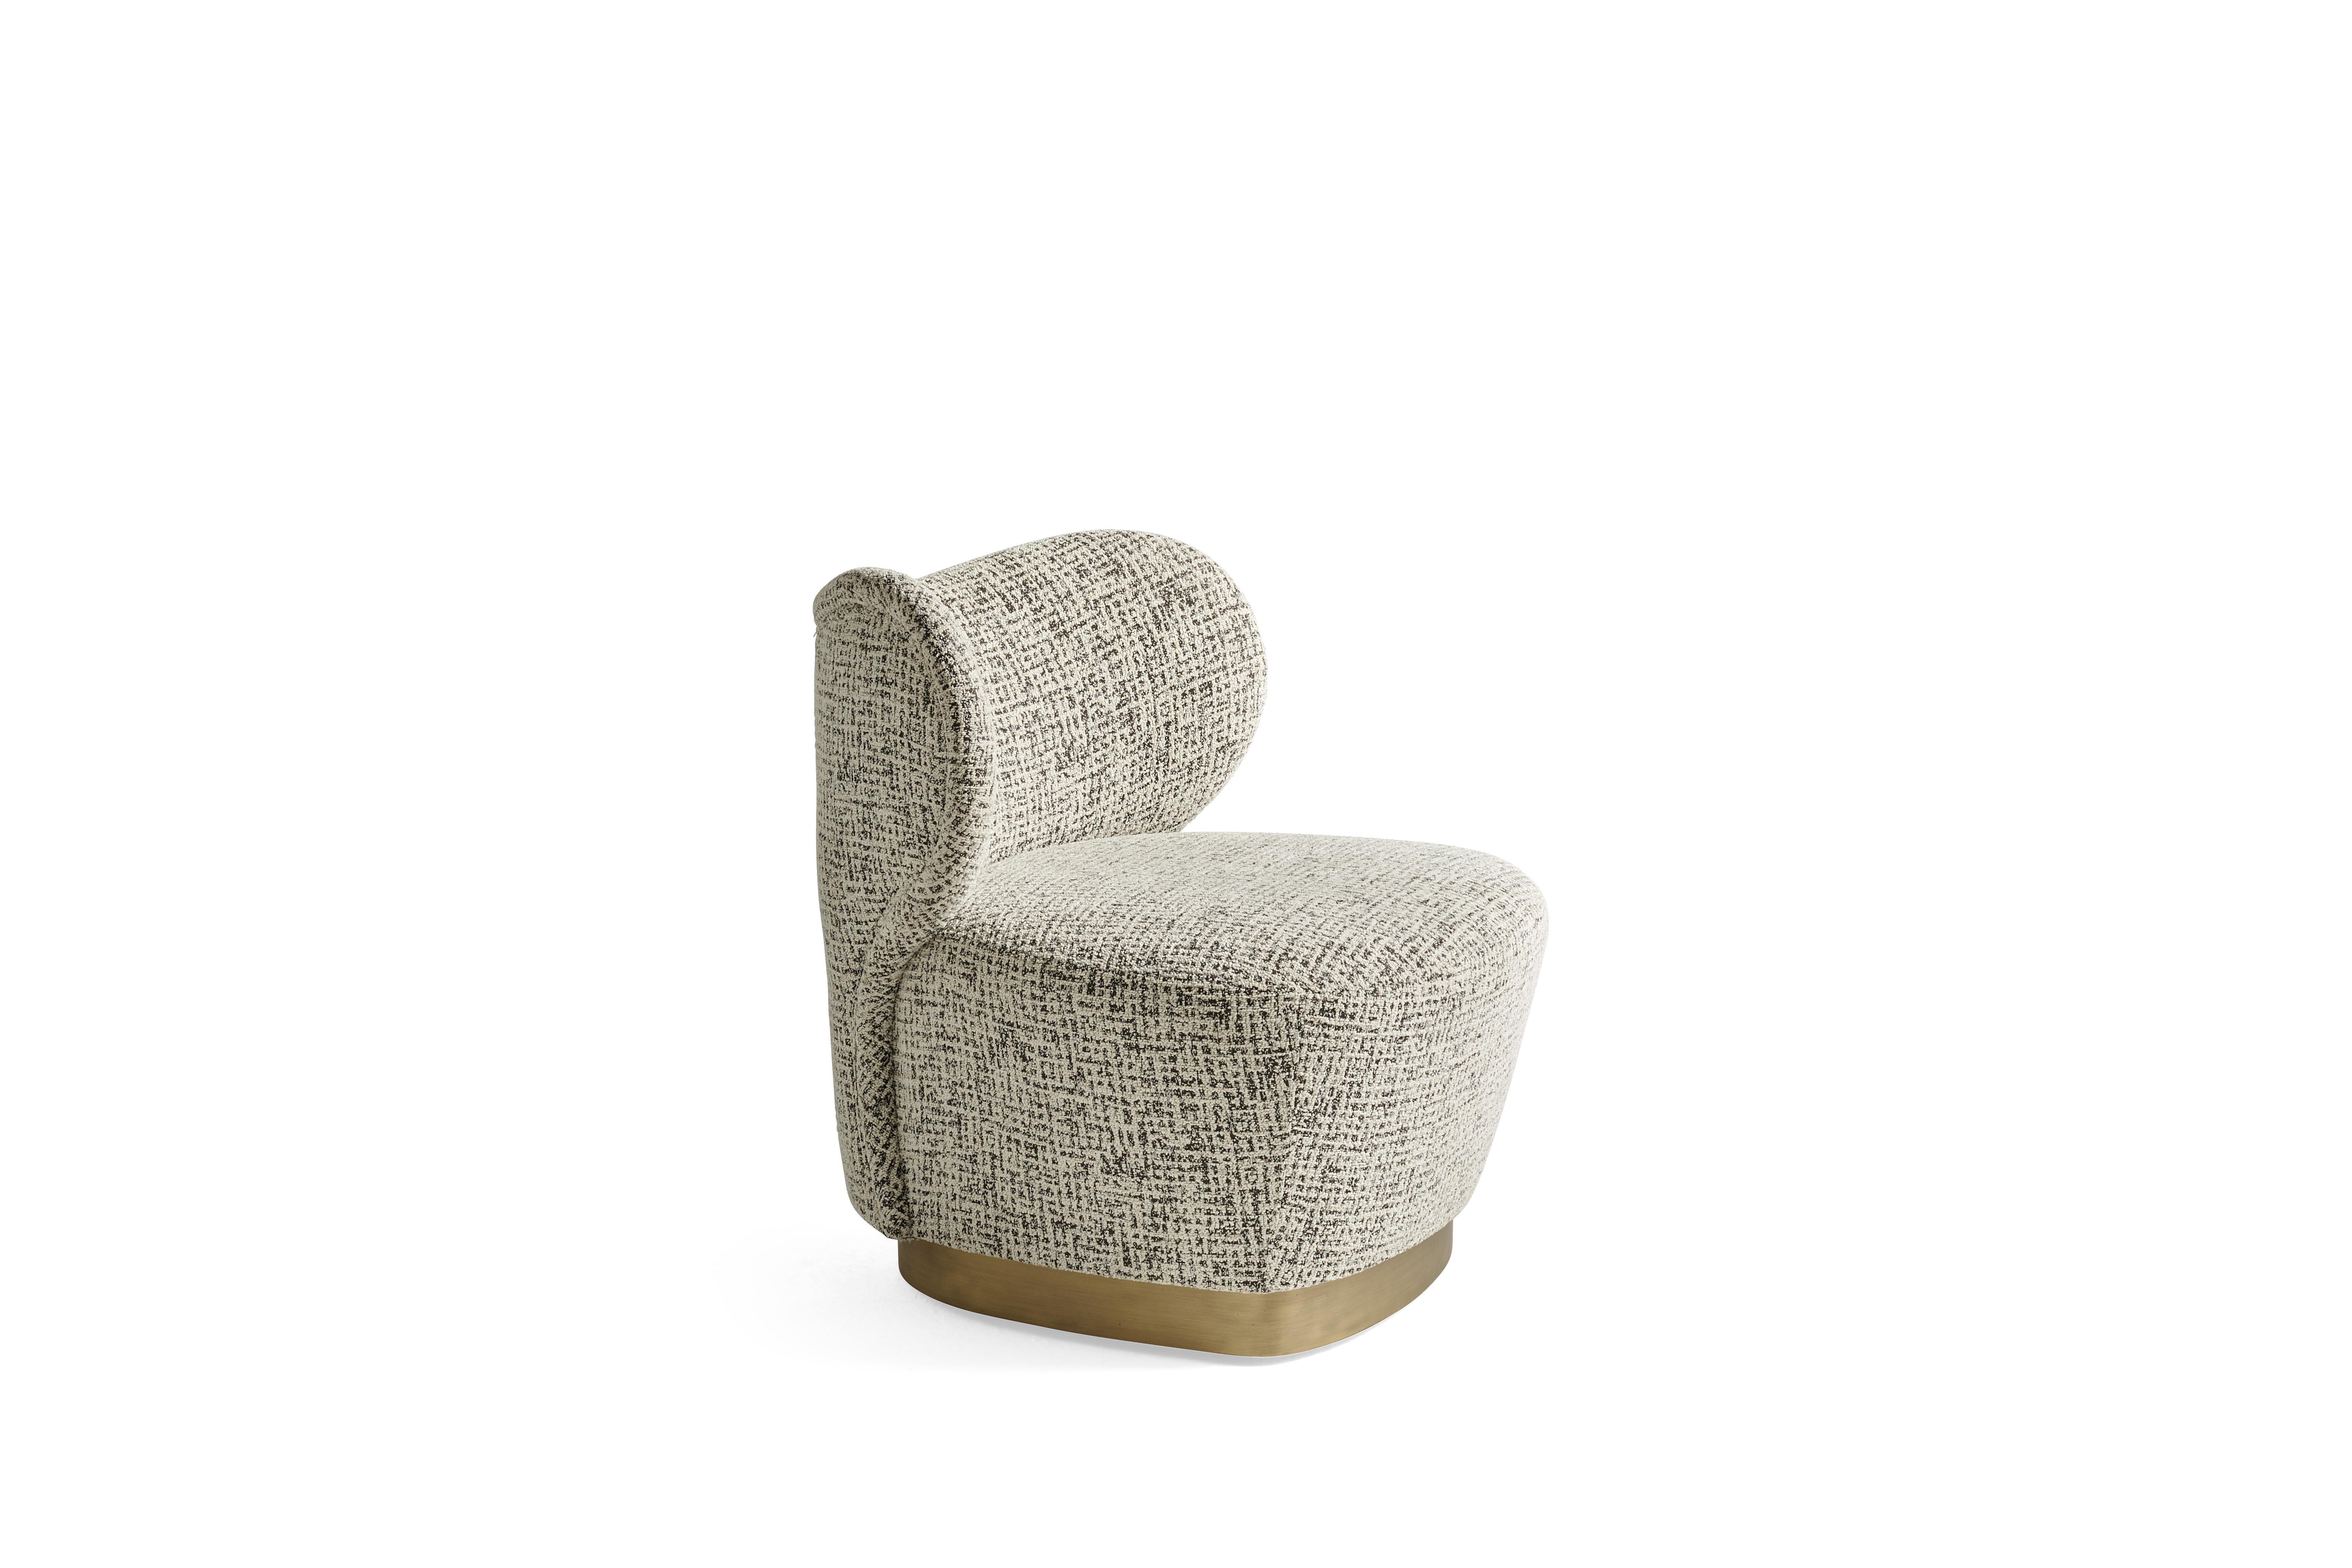 Retro taste and soft and rounded shapes for the Marvila armchair. The refined elegance and compact proportions are enhanced by the base with bronzed finishing, a detail that gives the whole a sophisticated decorative appeal.
Marvila armchair with